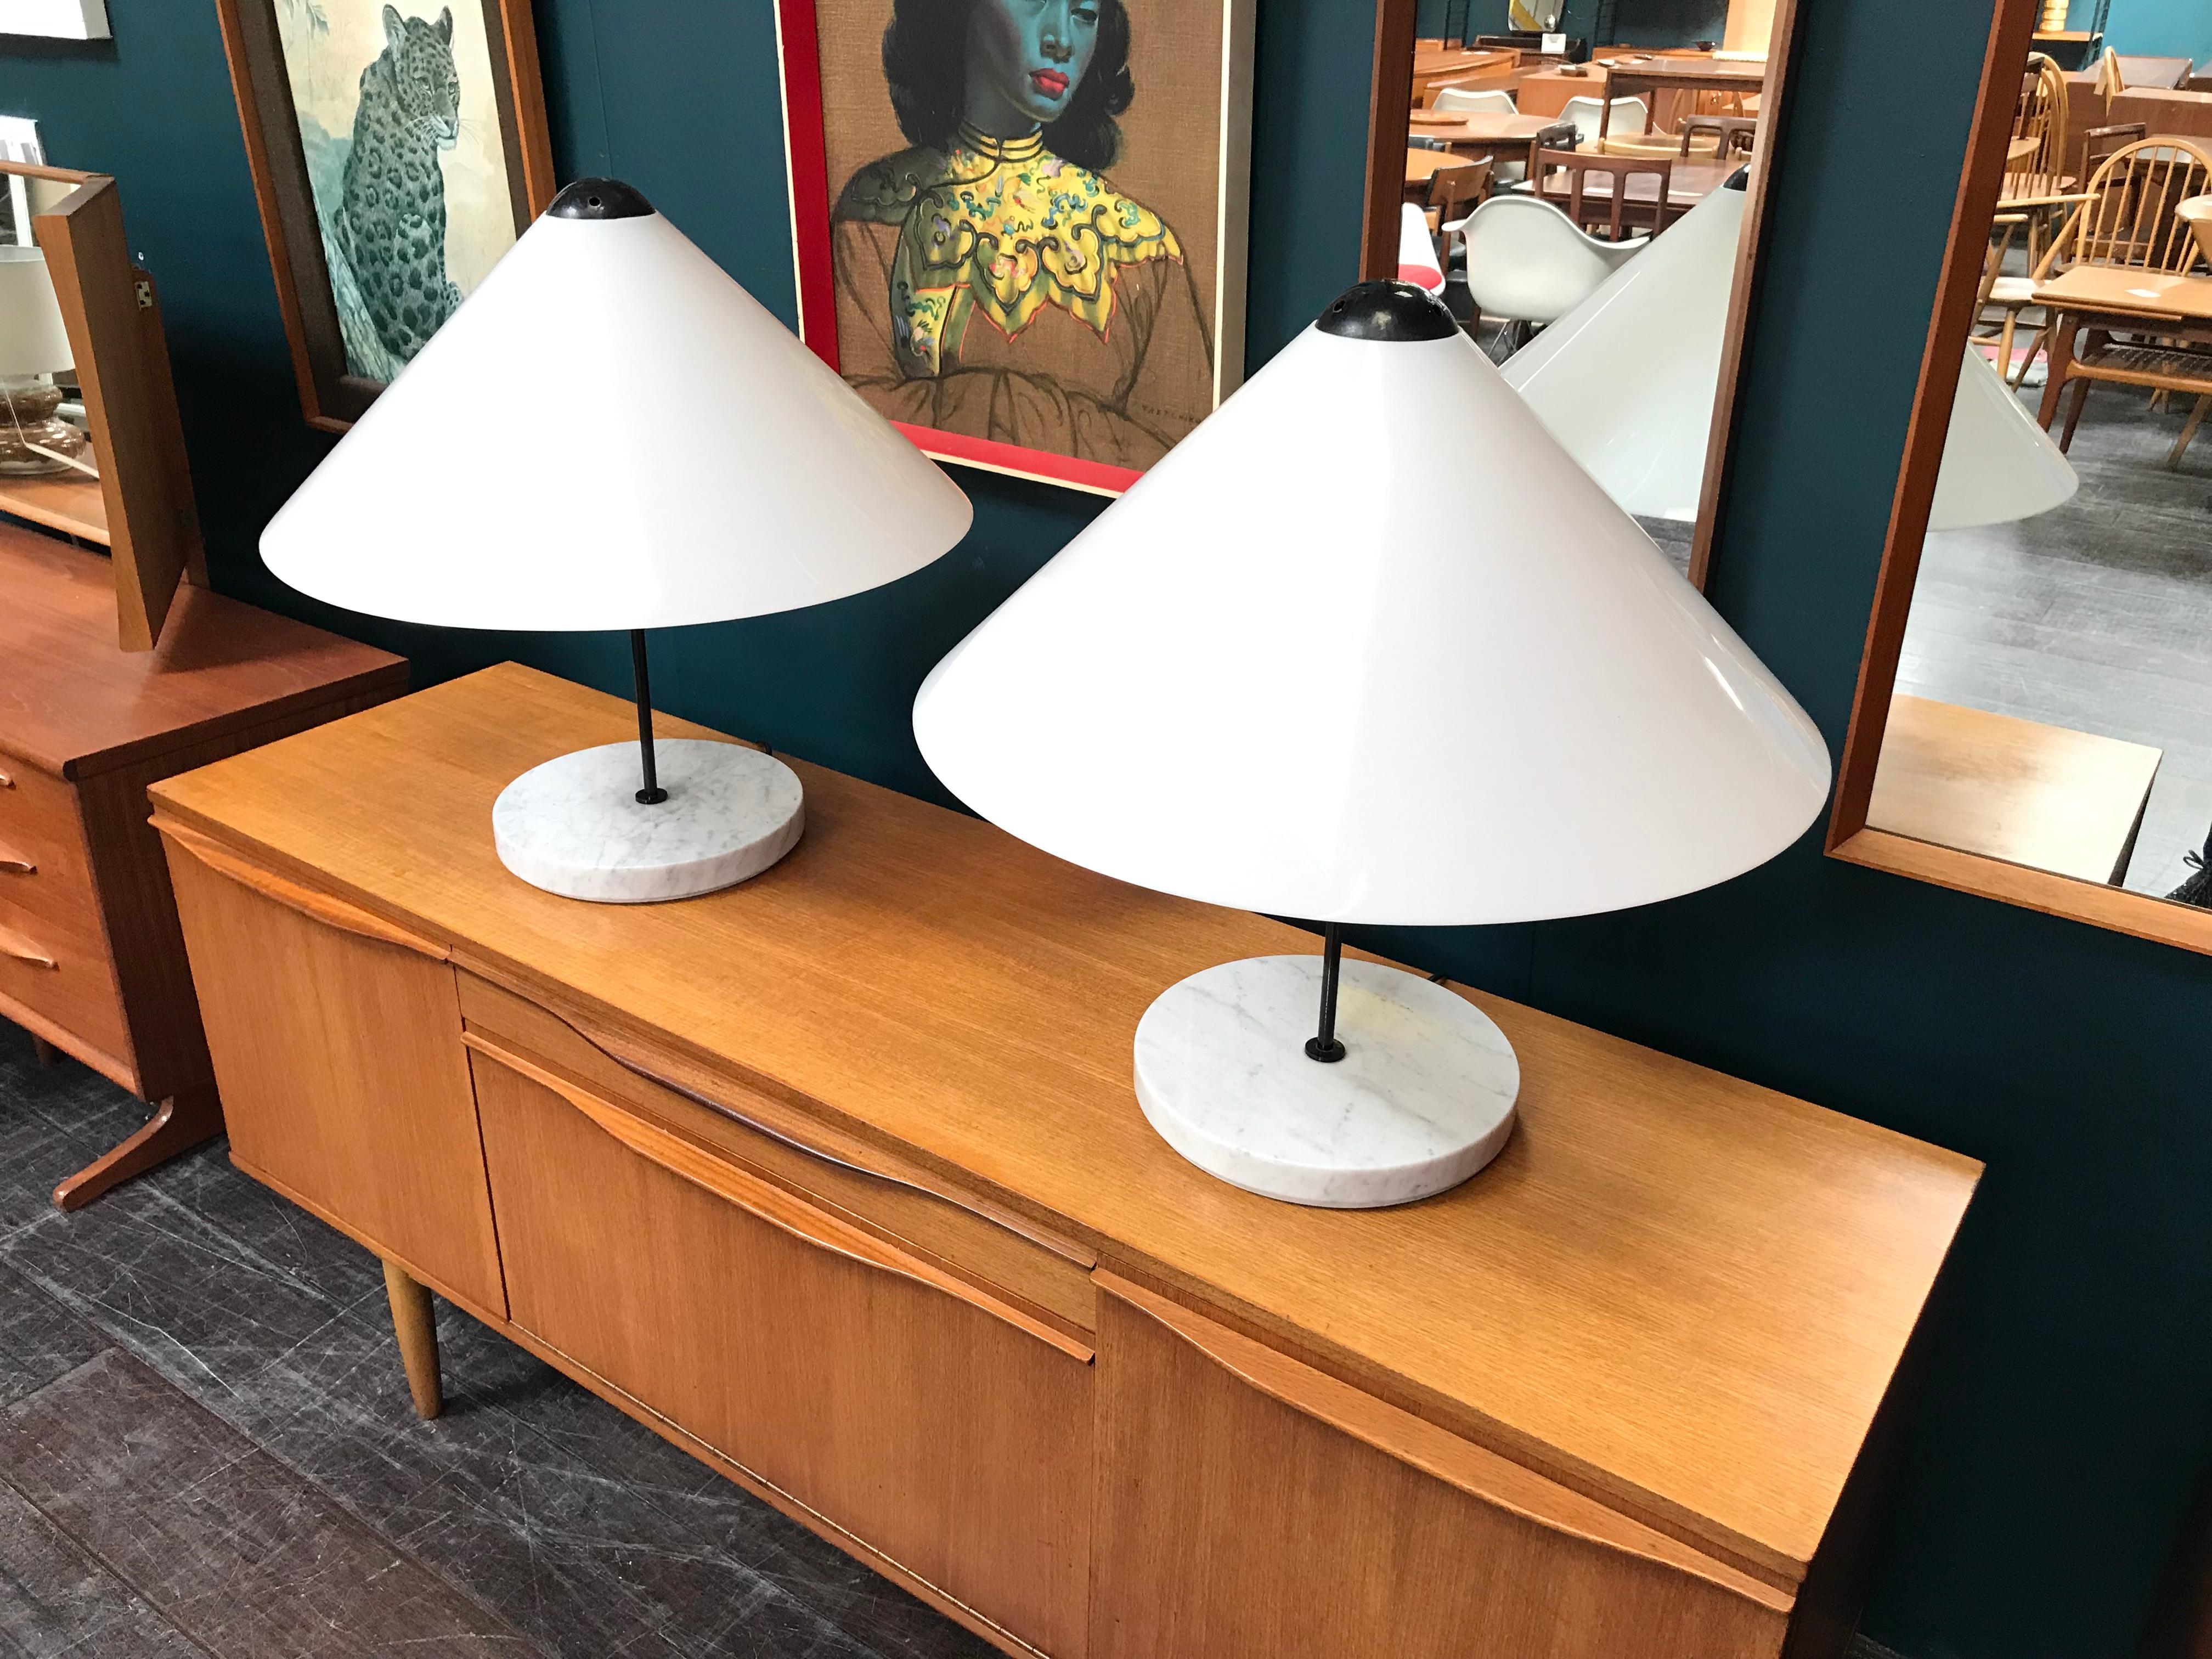 Pair of 'Snow' Italian Midcentury Table Lamps by Vico Magistretti for Oluce In Good Condition For Sale In Glasgow, GB